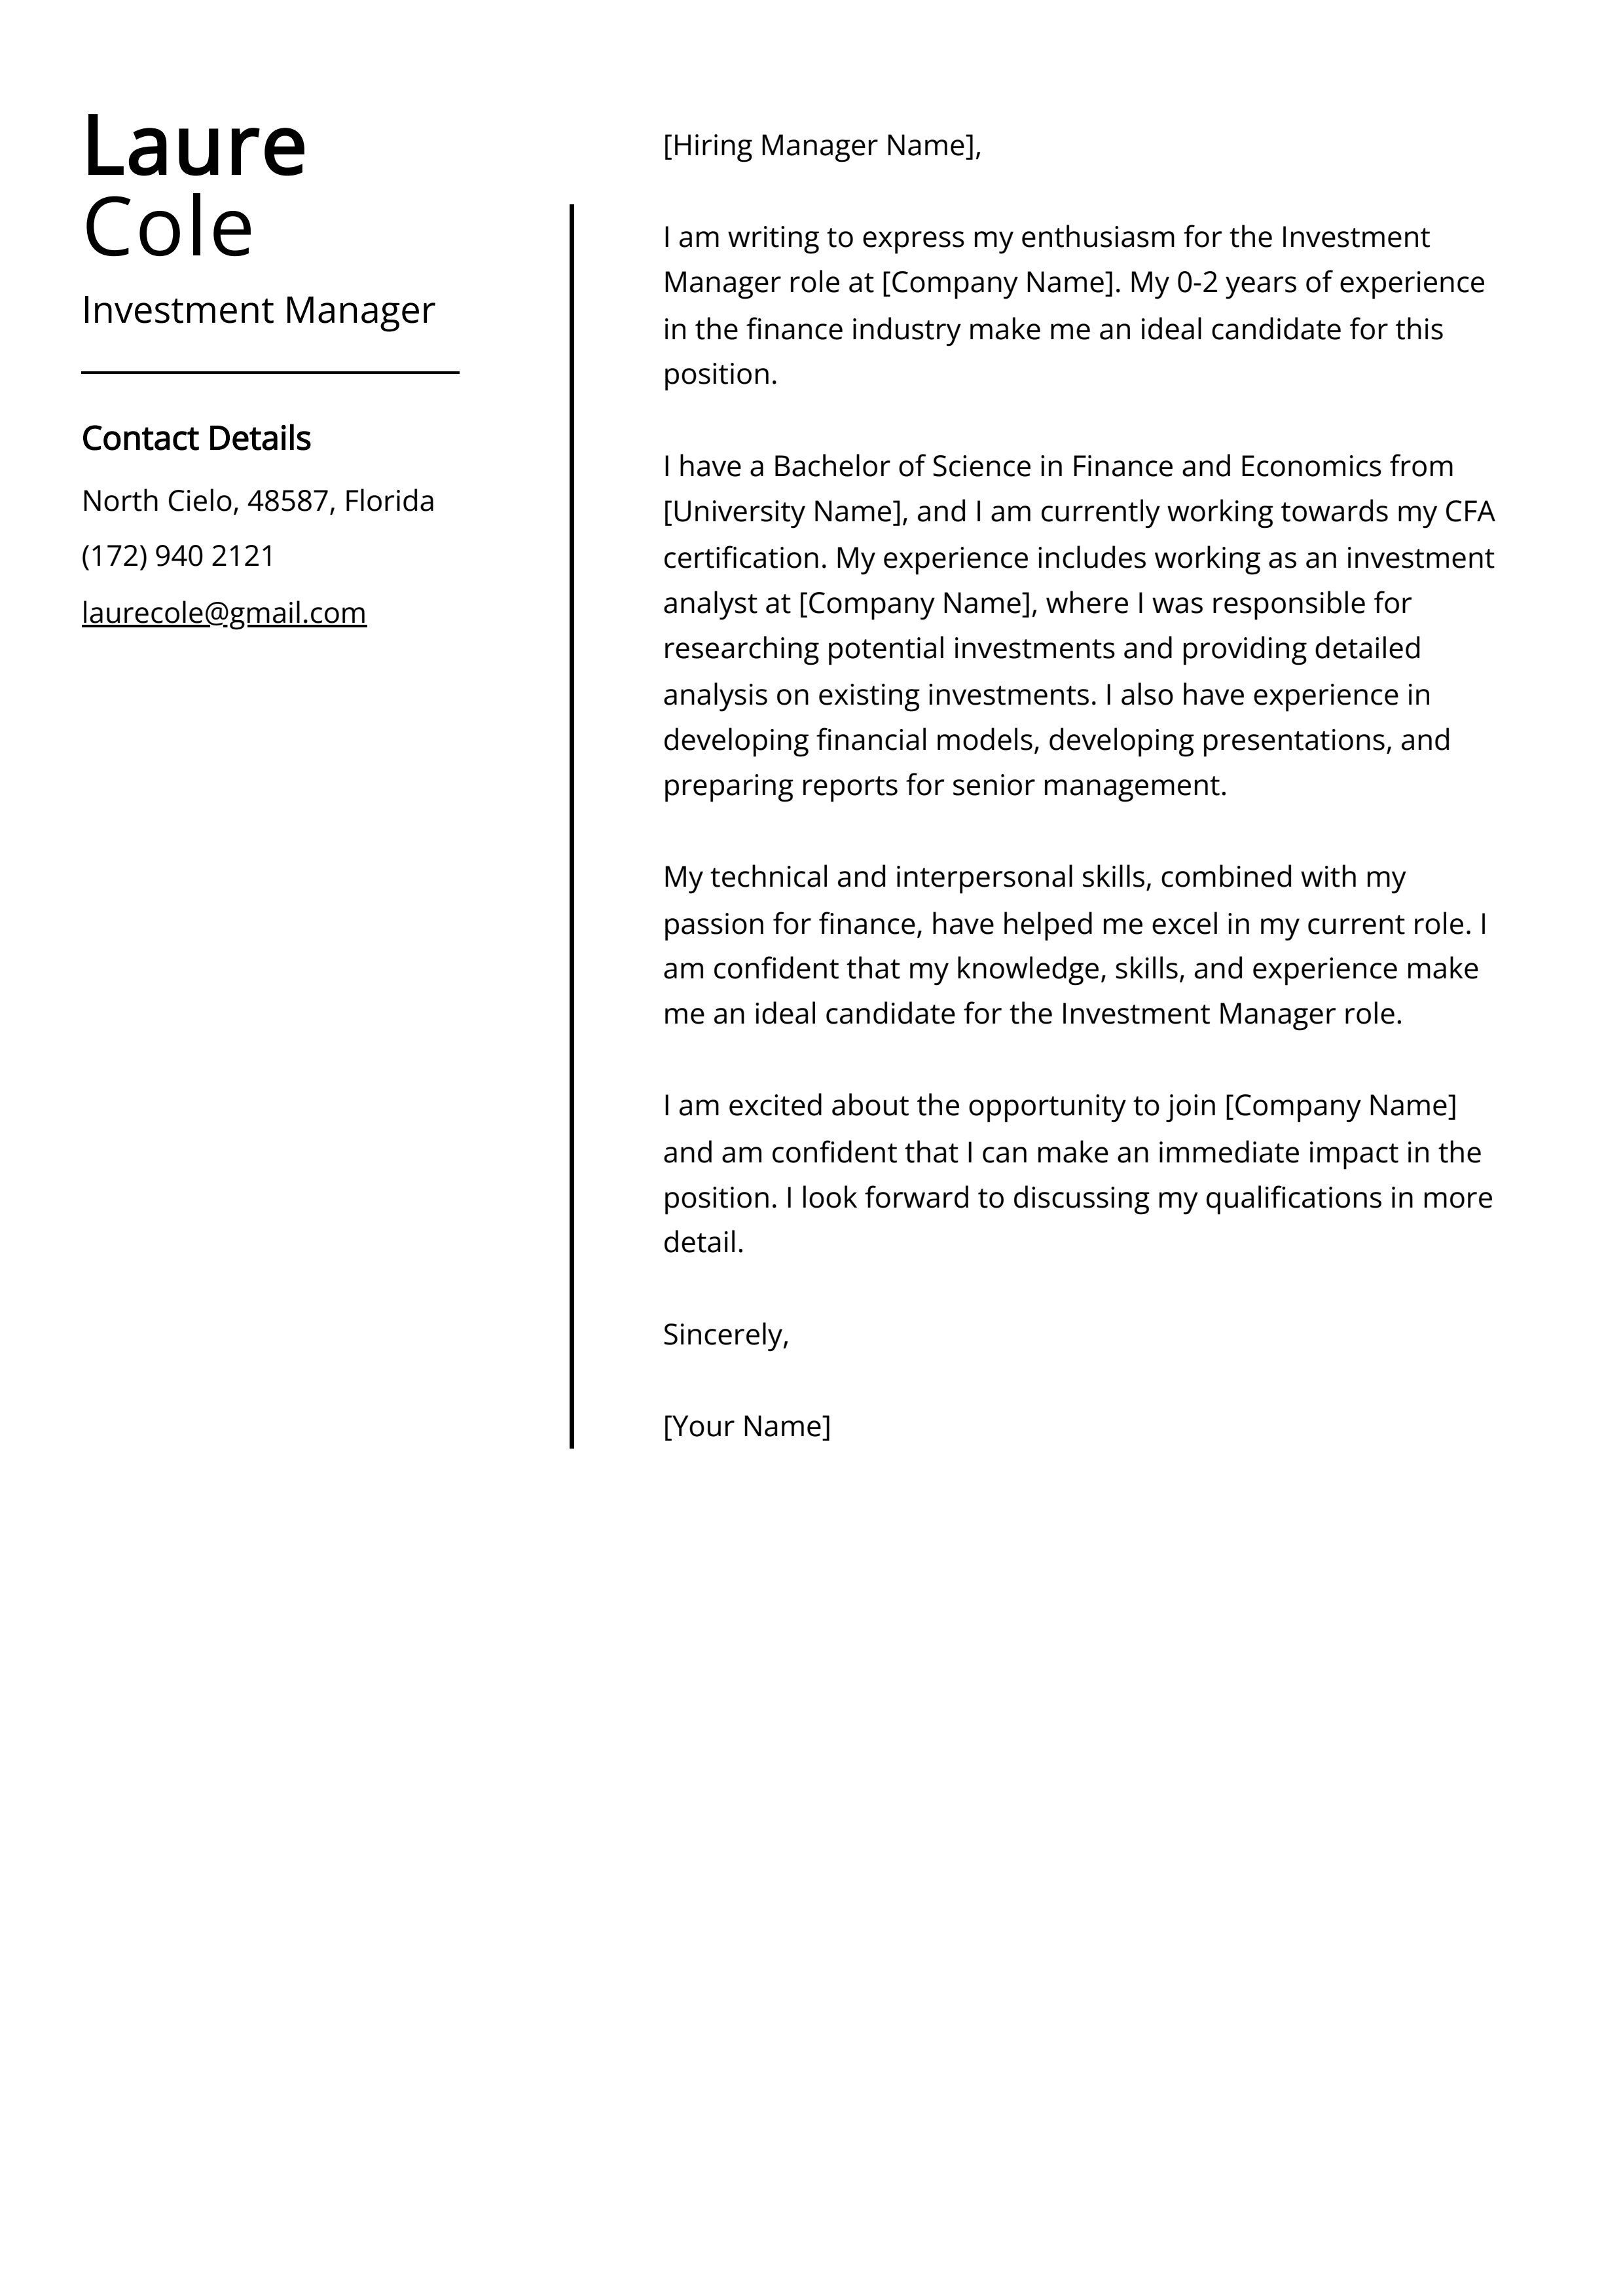 Investment Manager Cover Letter Example